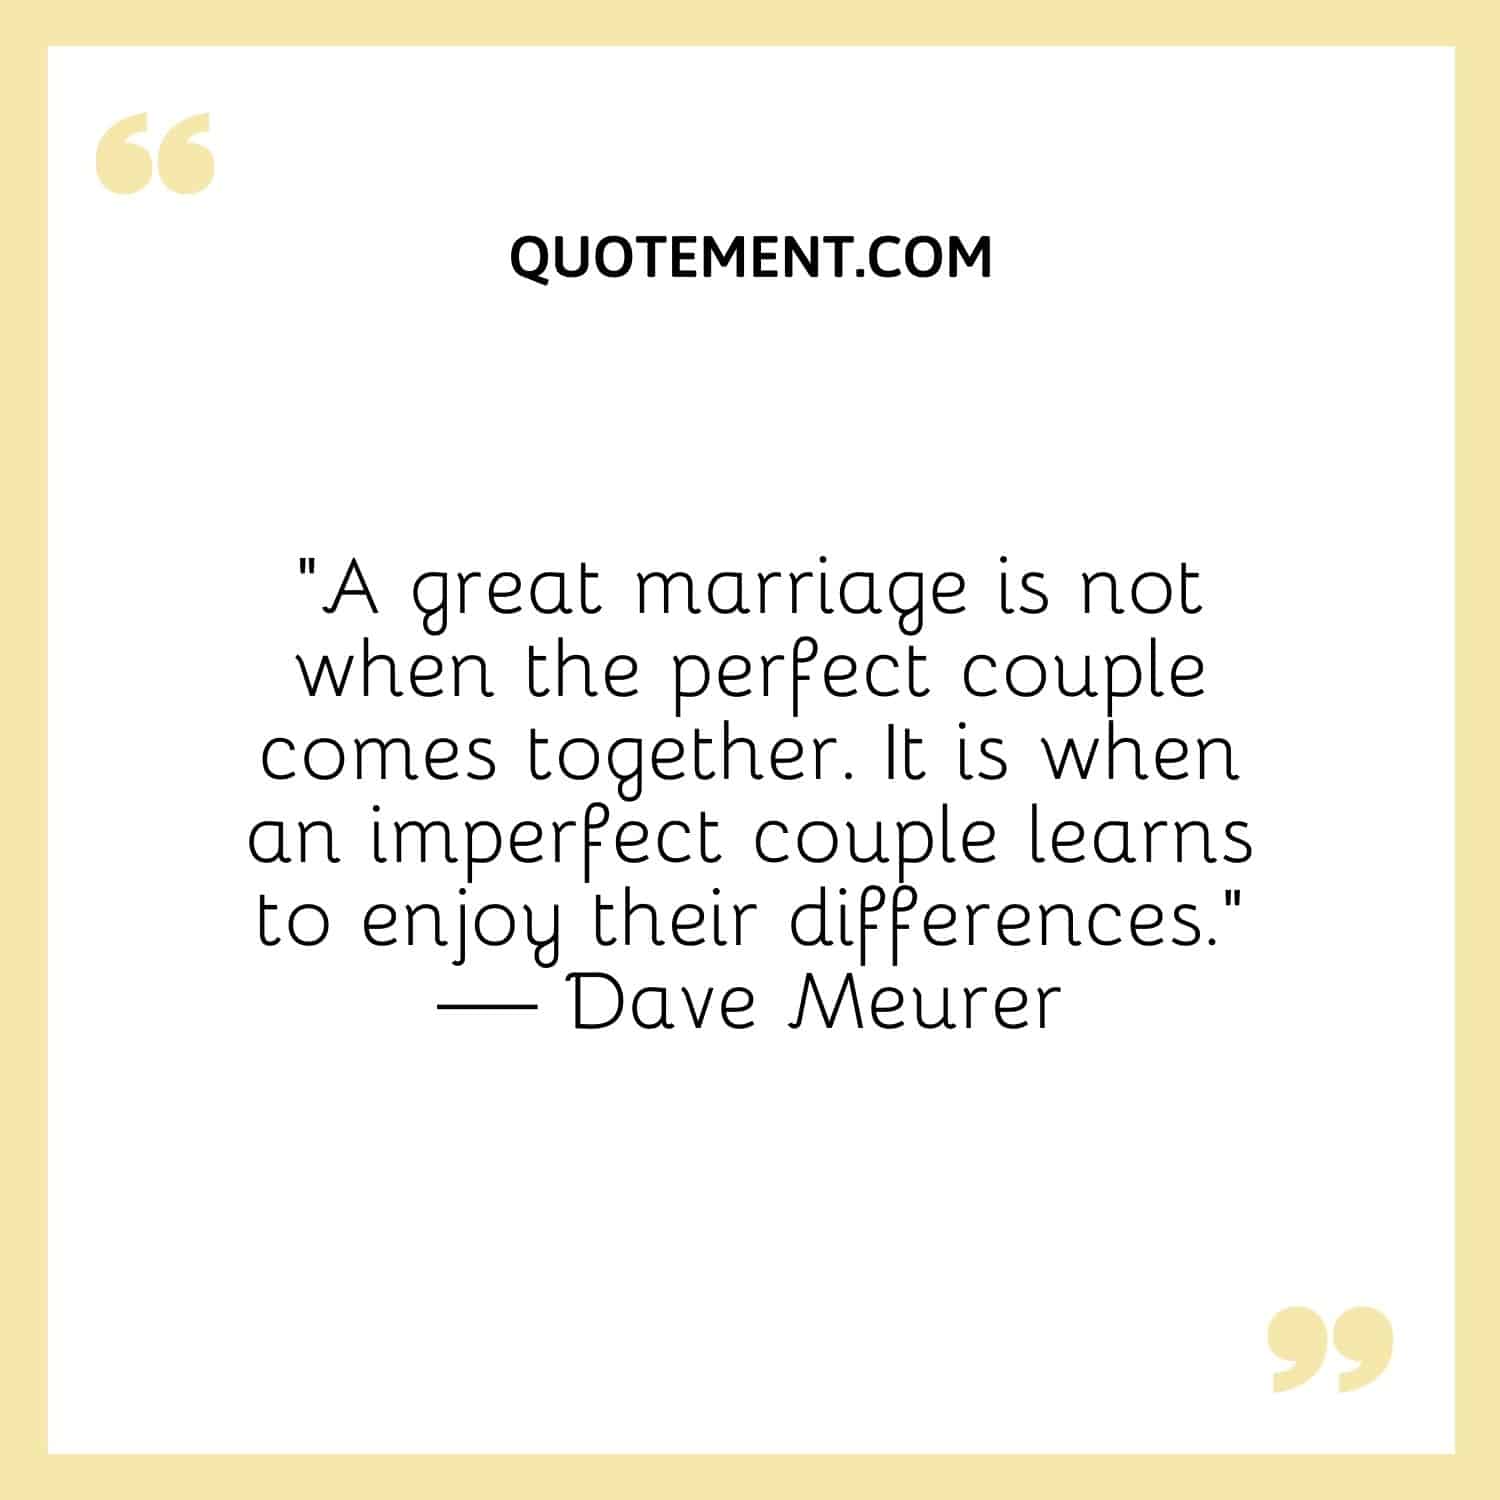 A great marriage is not when the perfect couple comes together